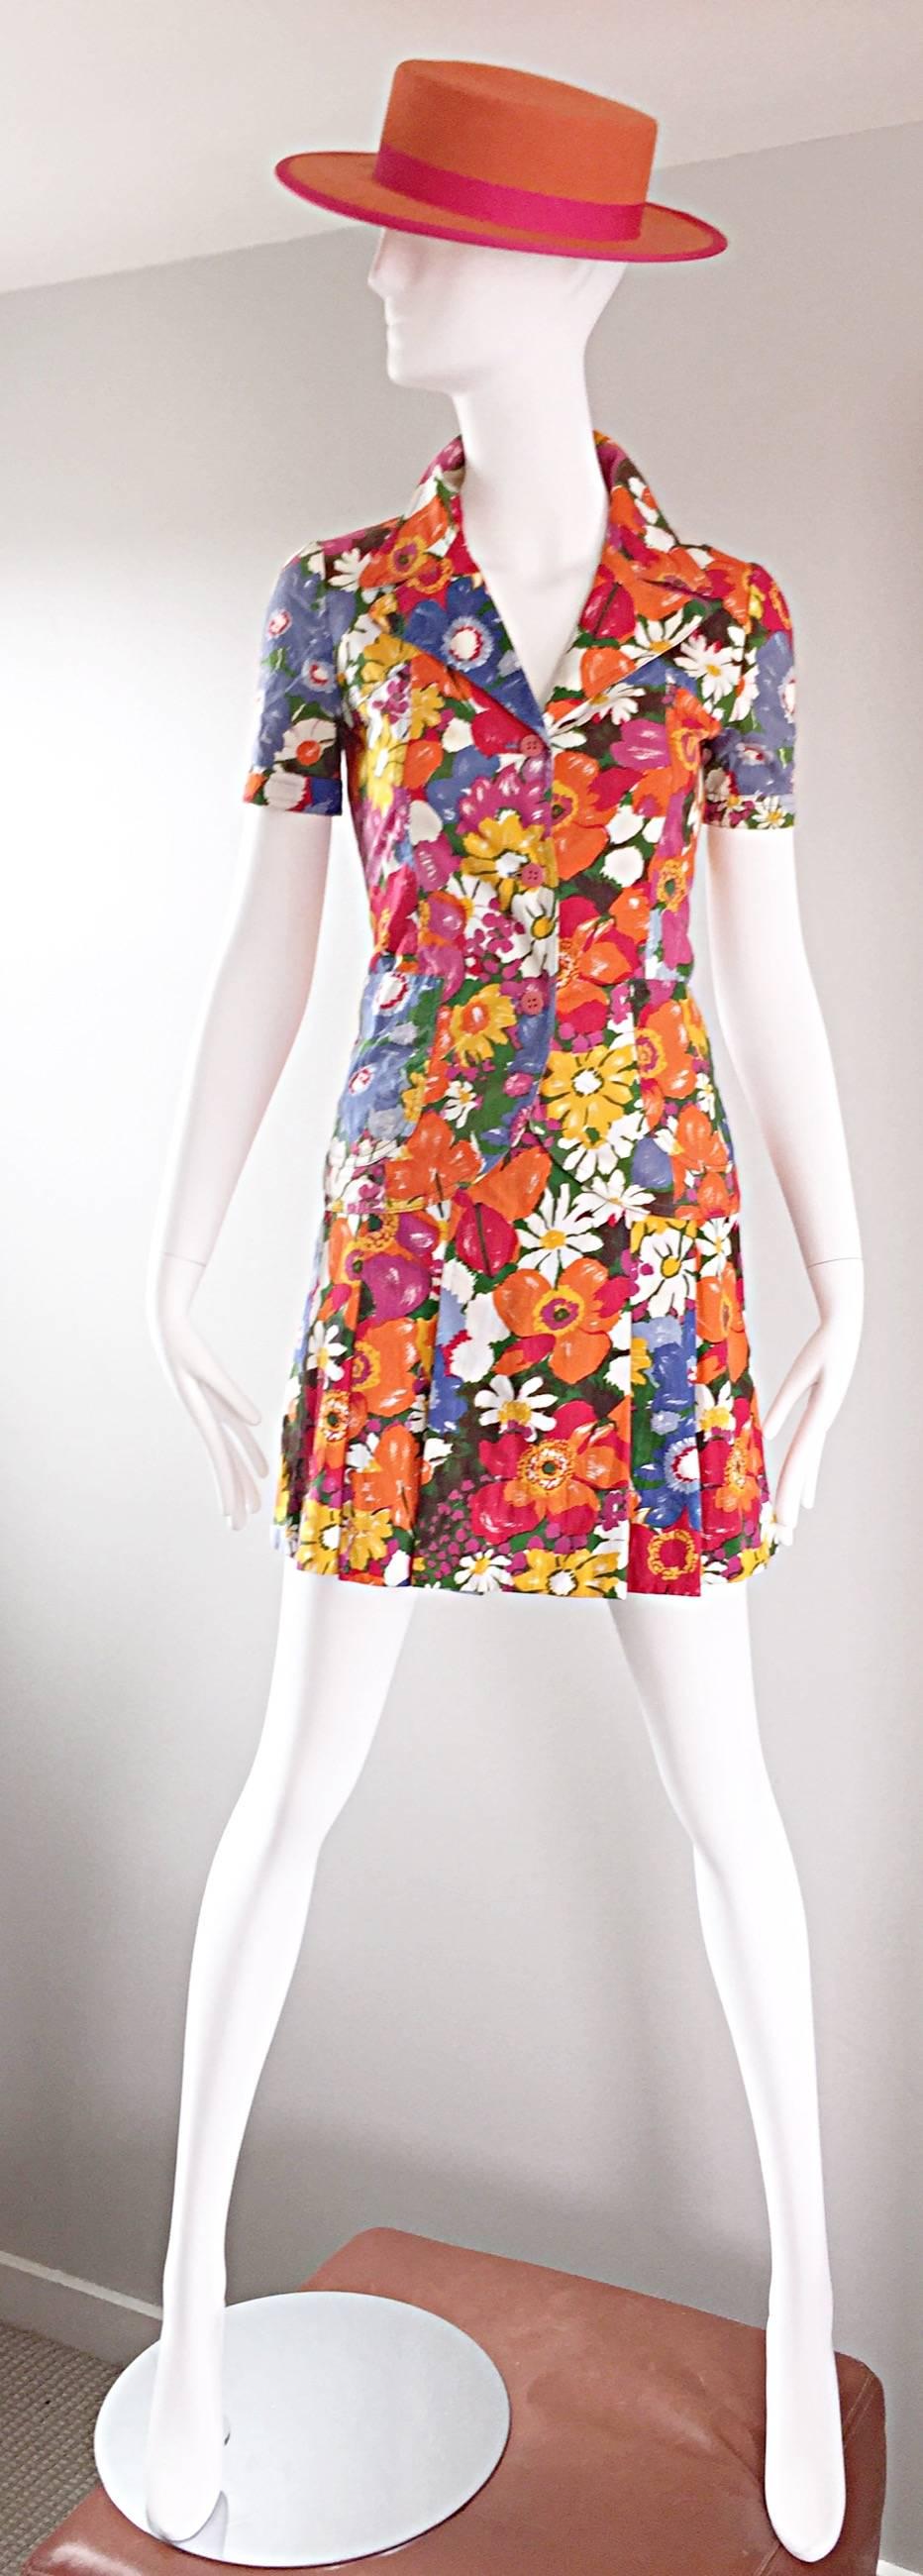 Chic vintage 60s mod vibrant colorful flower print cotton skirt and shirt suit set by French label ZIBAUT! Colorful printed flowers in pink, orange, blue, yellow, white and green (I love the daisies printed throughout). High waisted pleated mini